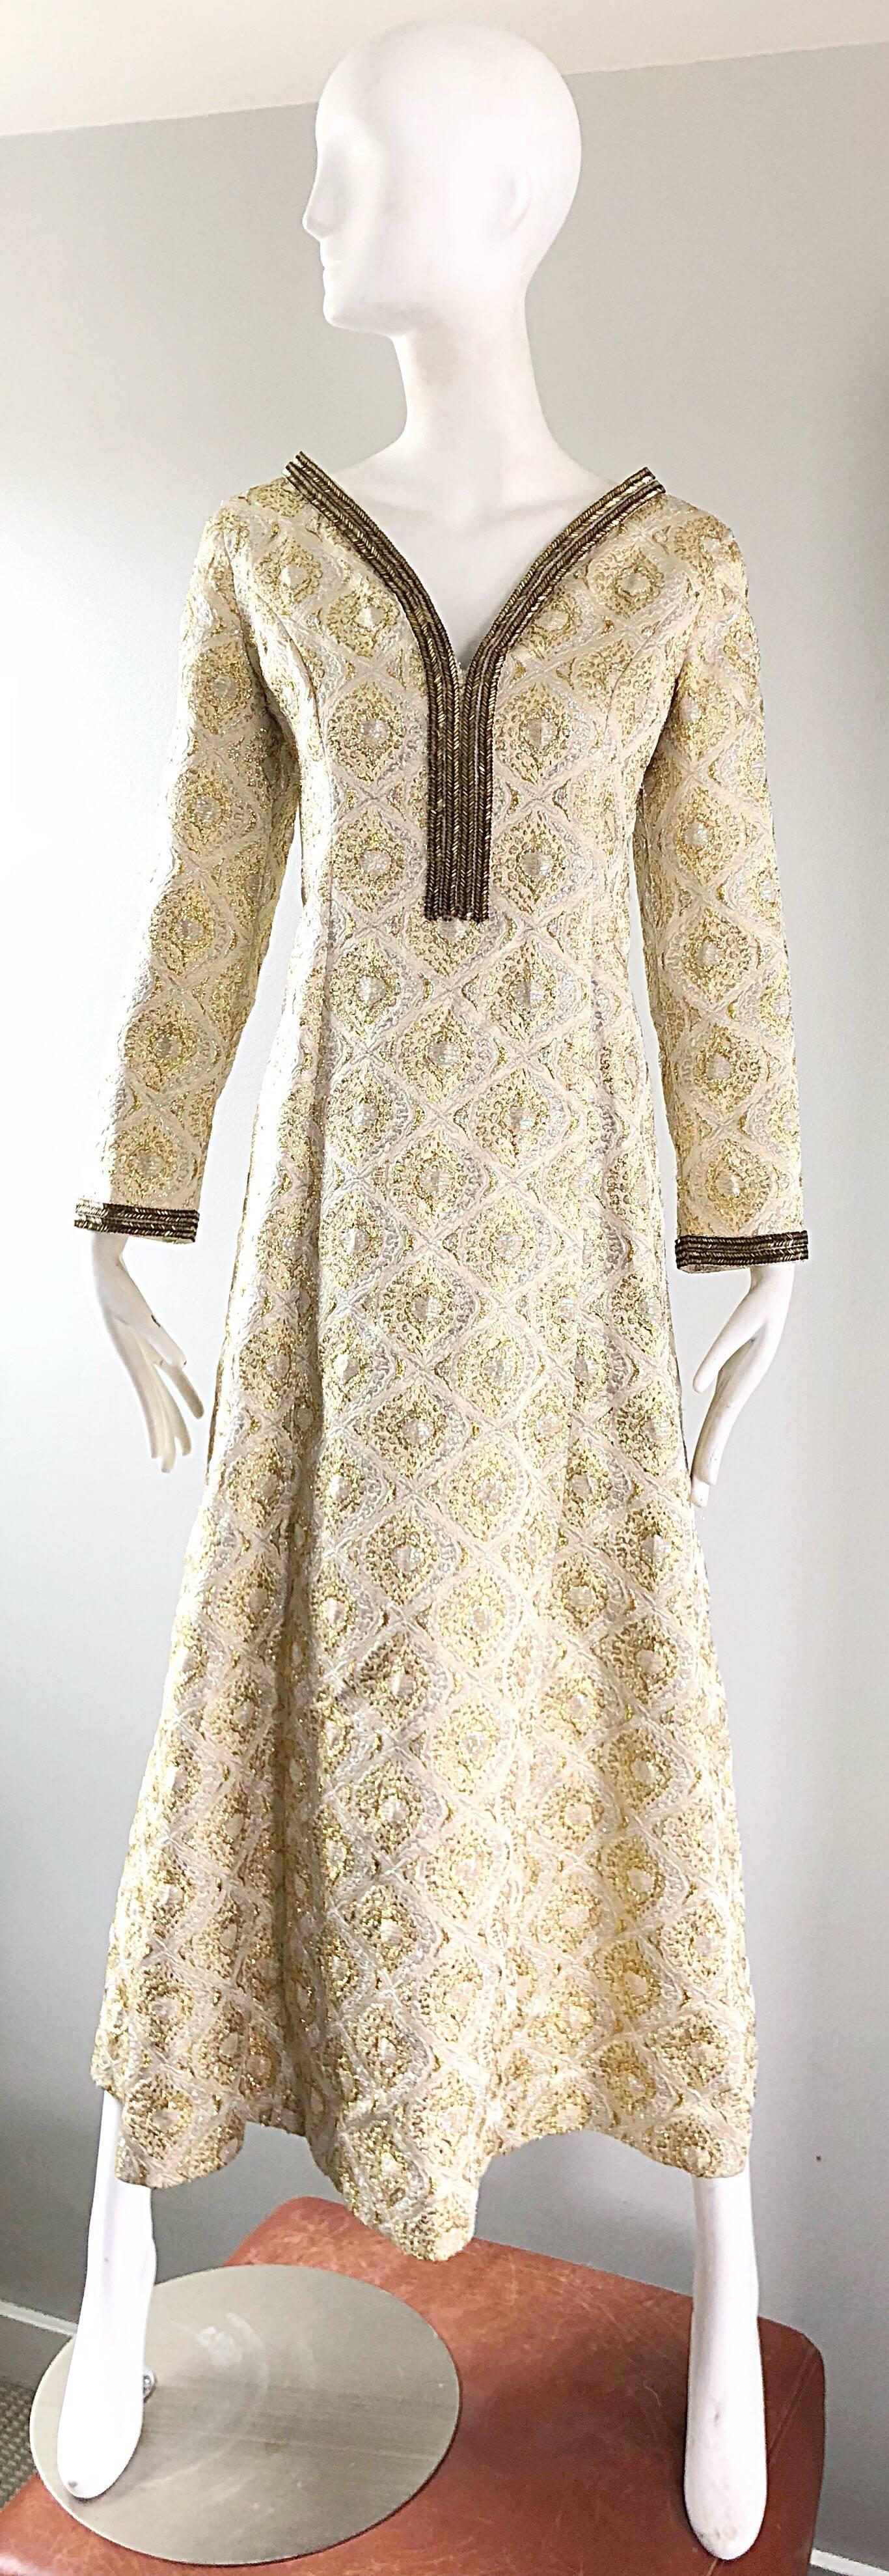 Amazing vintage 1970s gold and silver silk brocade beaded Moroccan kaftan / maxi dress! Features an iridescent gold and silver with bronze beads around the collar and each sleeve cuff. Full metal zipper up the back with hook-and-eye closure. 
Great